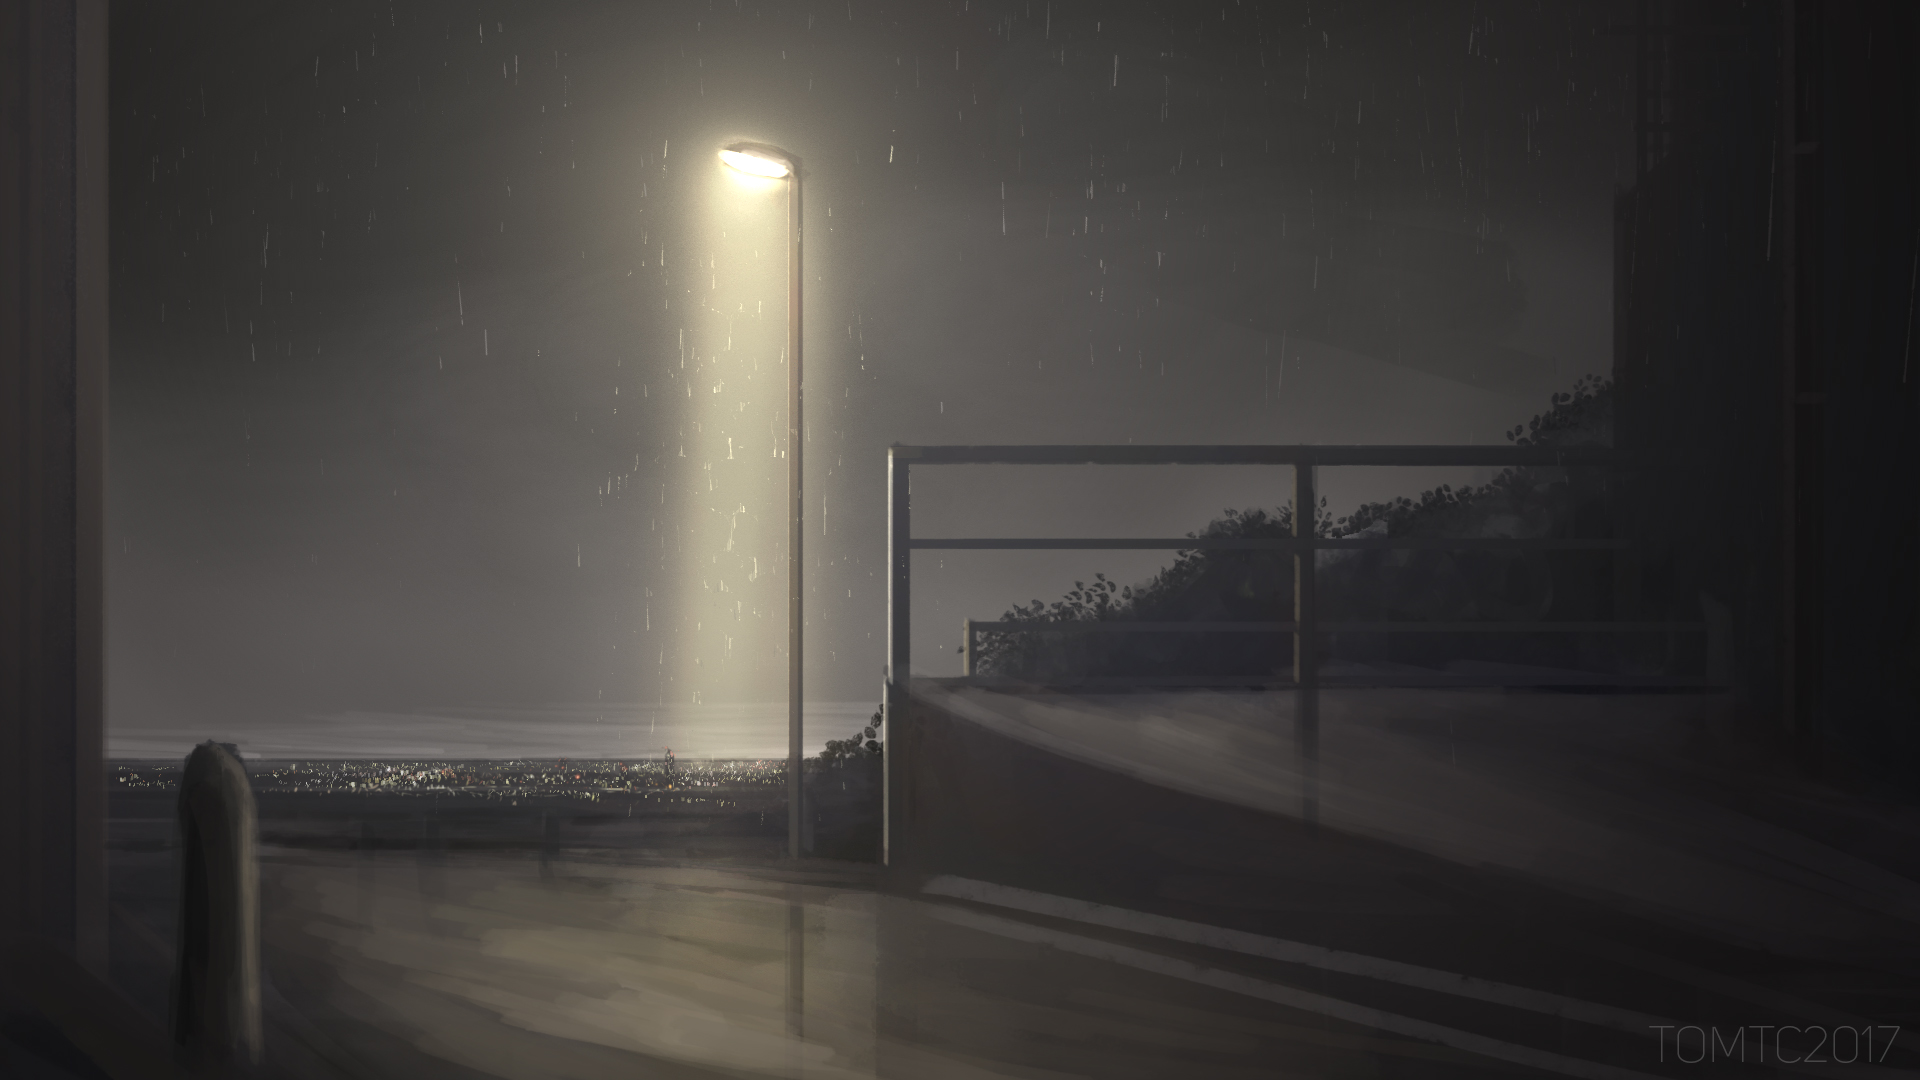 Lonely Street Light by Tommy Chandra